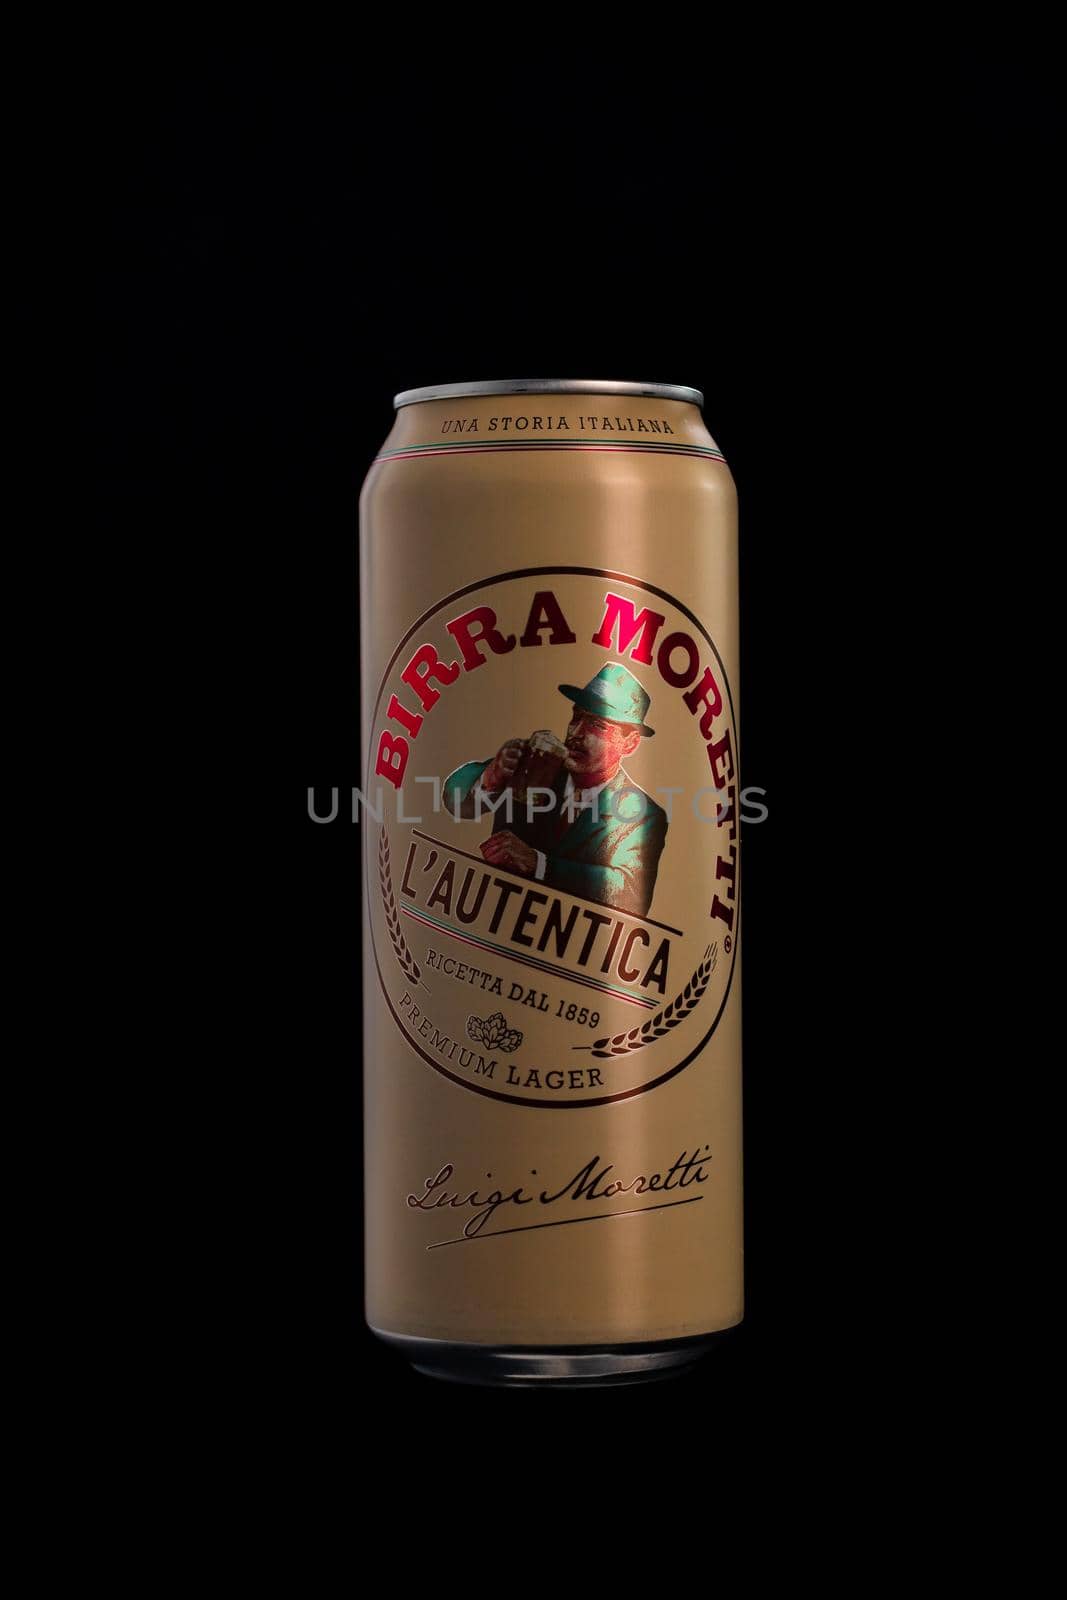 Birra Moretti, a premium lager beer produced by Italian brewing company now owned by Heineken International. Studio photo shoot in Bucharest, Romania, 2021 by vladispas